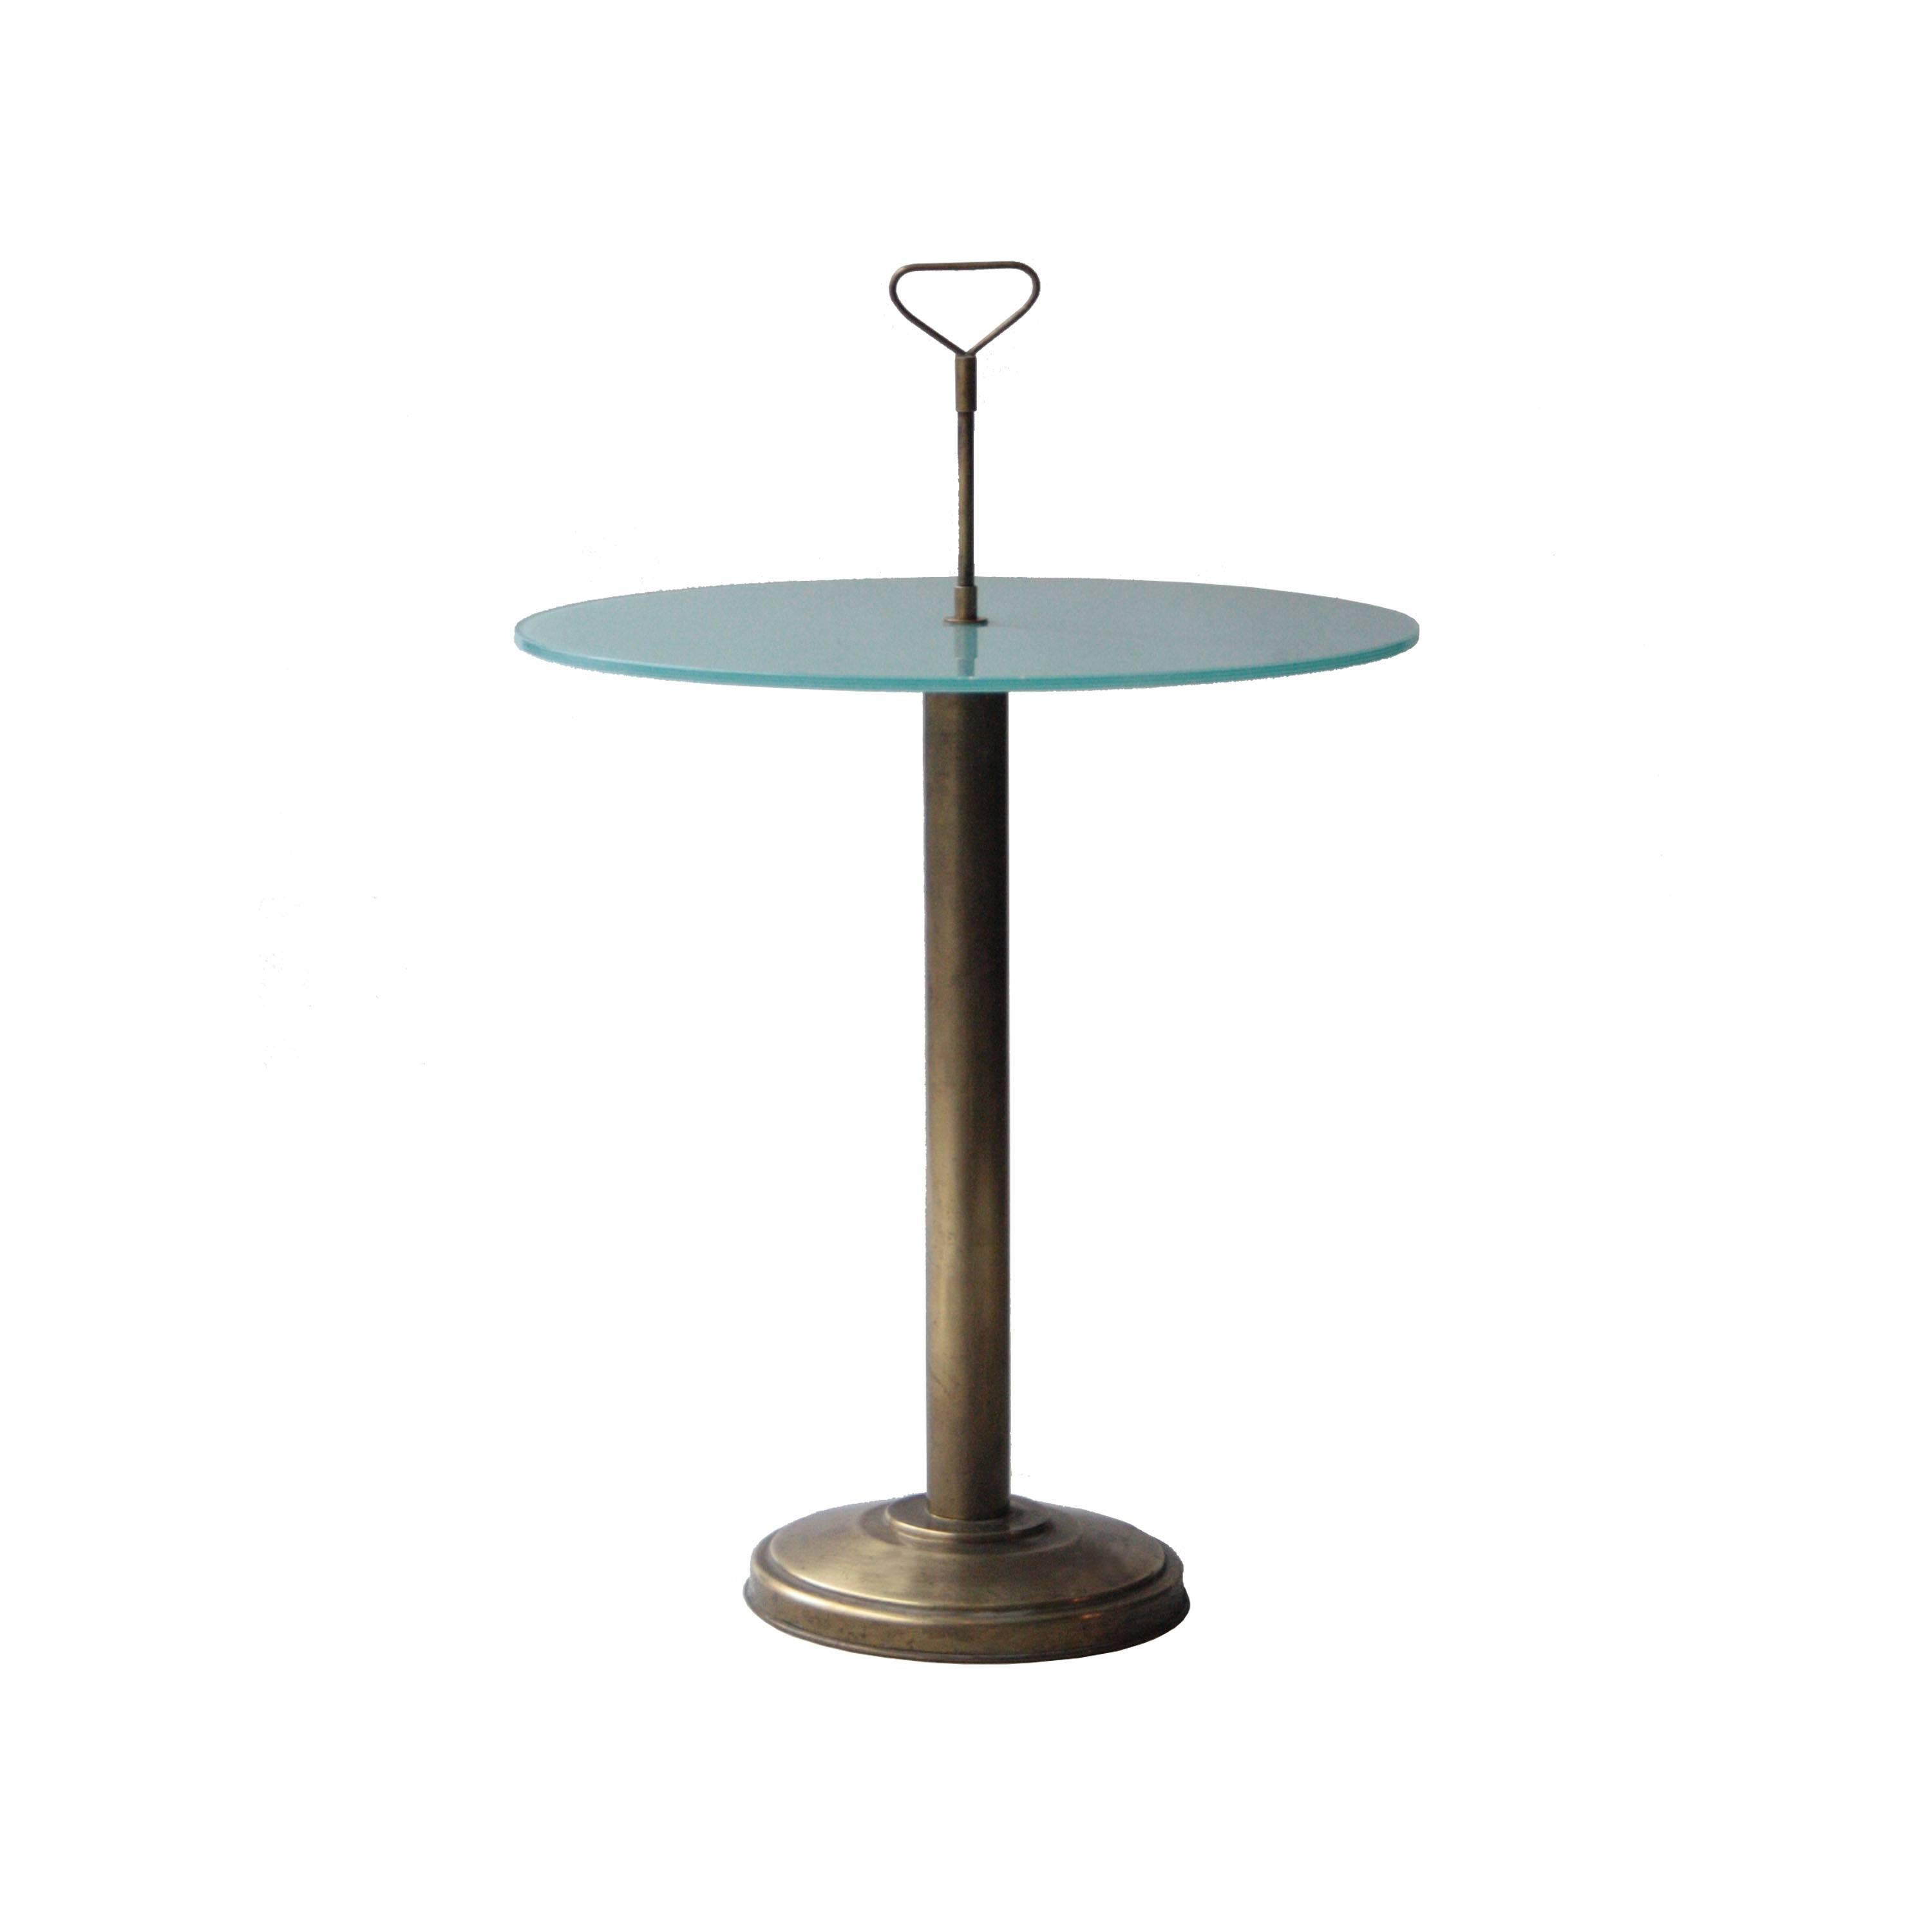 Side table with foot and base made of brass and green glass lacobel top.